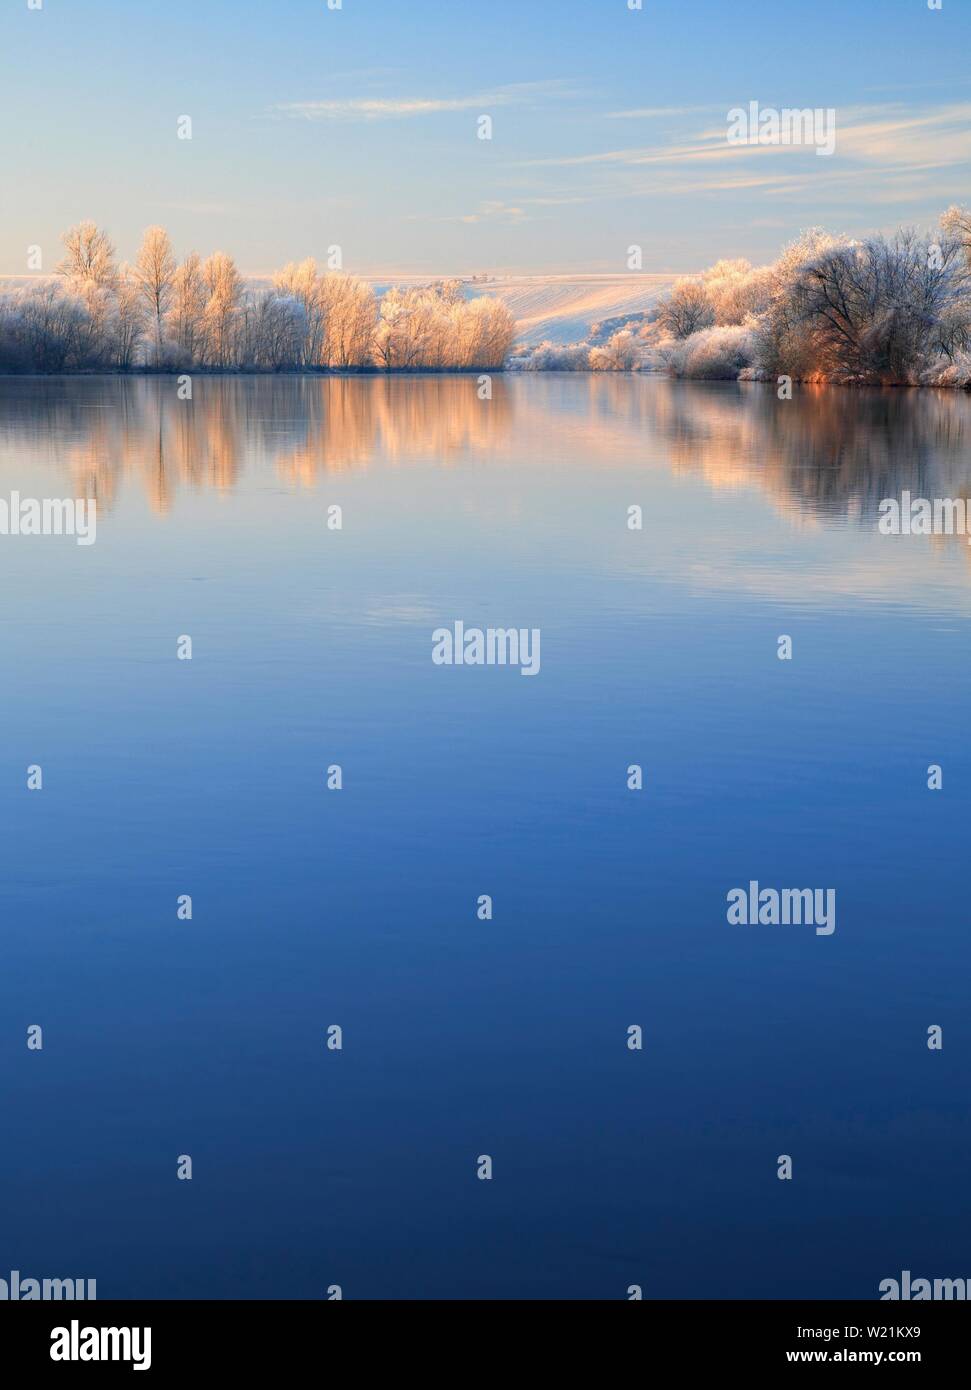 River landscape in winter at the river Saale, trees with frost and snow at the bank in the morning light, water reflection, Lower Saale Valley nature Stock Photo